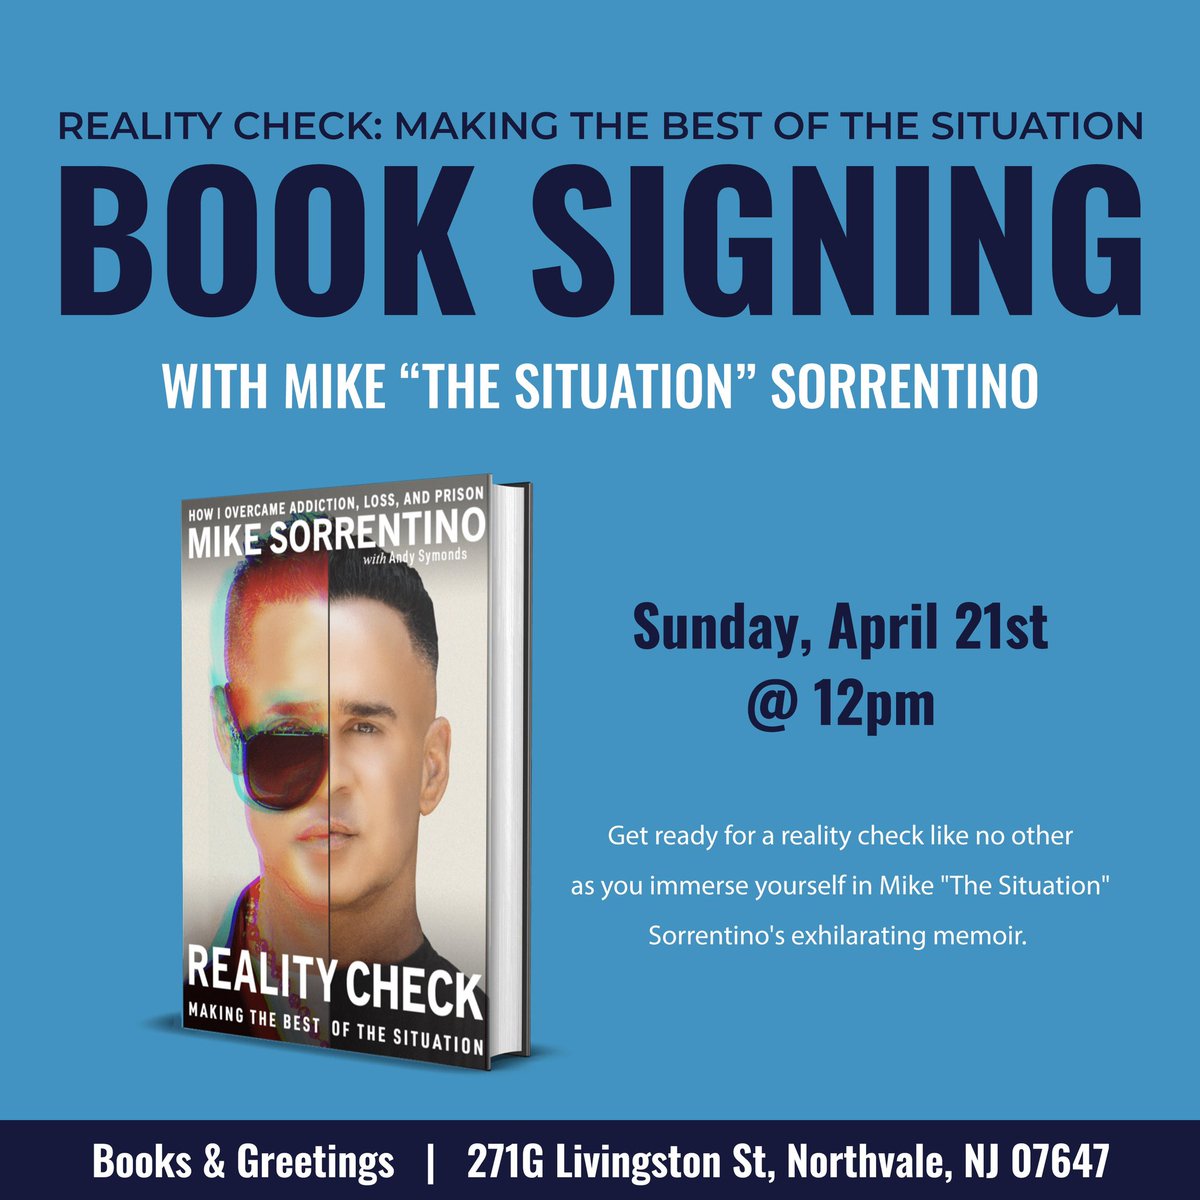 Northvale, NJ ‼️Standup only two day left for a Situation 🔥 Join me this Sunday @12pm at @booksngreetings for a Reality Check:Making the Best of the Situation Book Signing 😎 Tickets included with book purchase🎟️: eventbrite.com/e/meet-the-jer… See you there 🔥